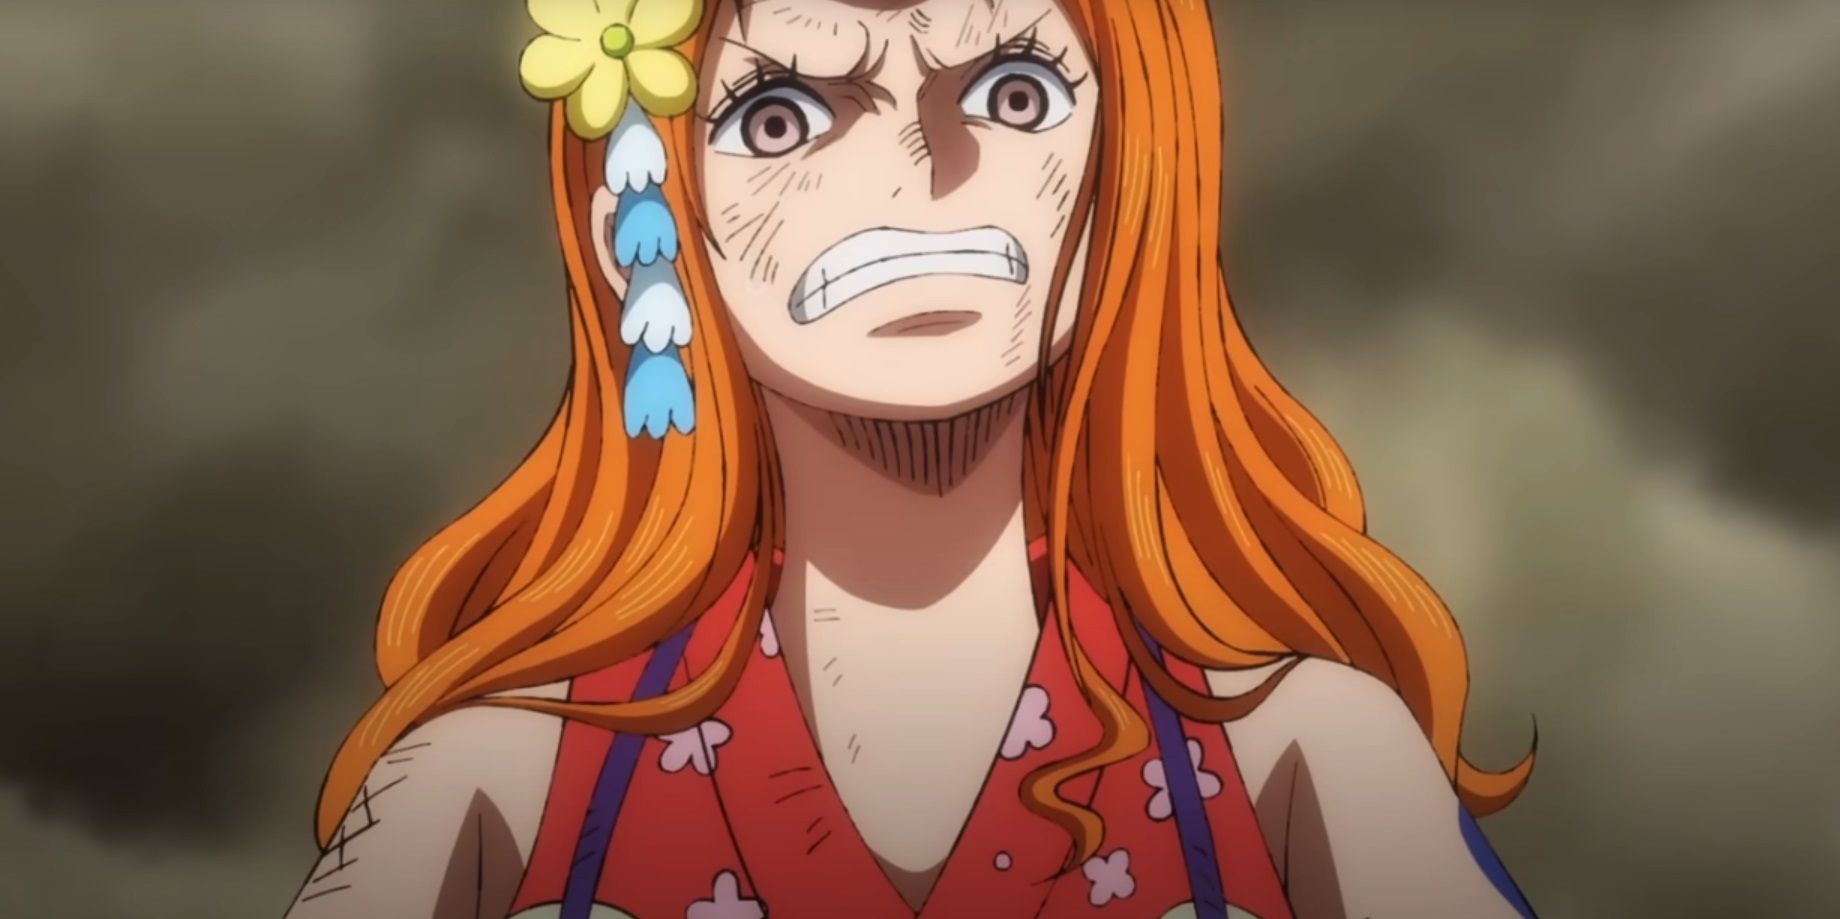 nami looks angry in her red wano outfit